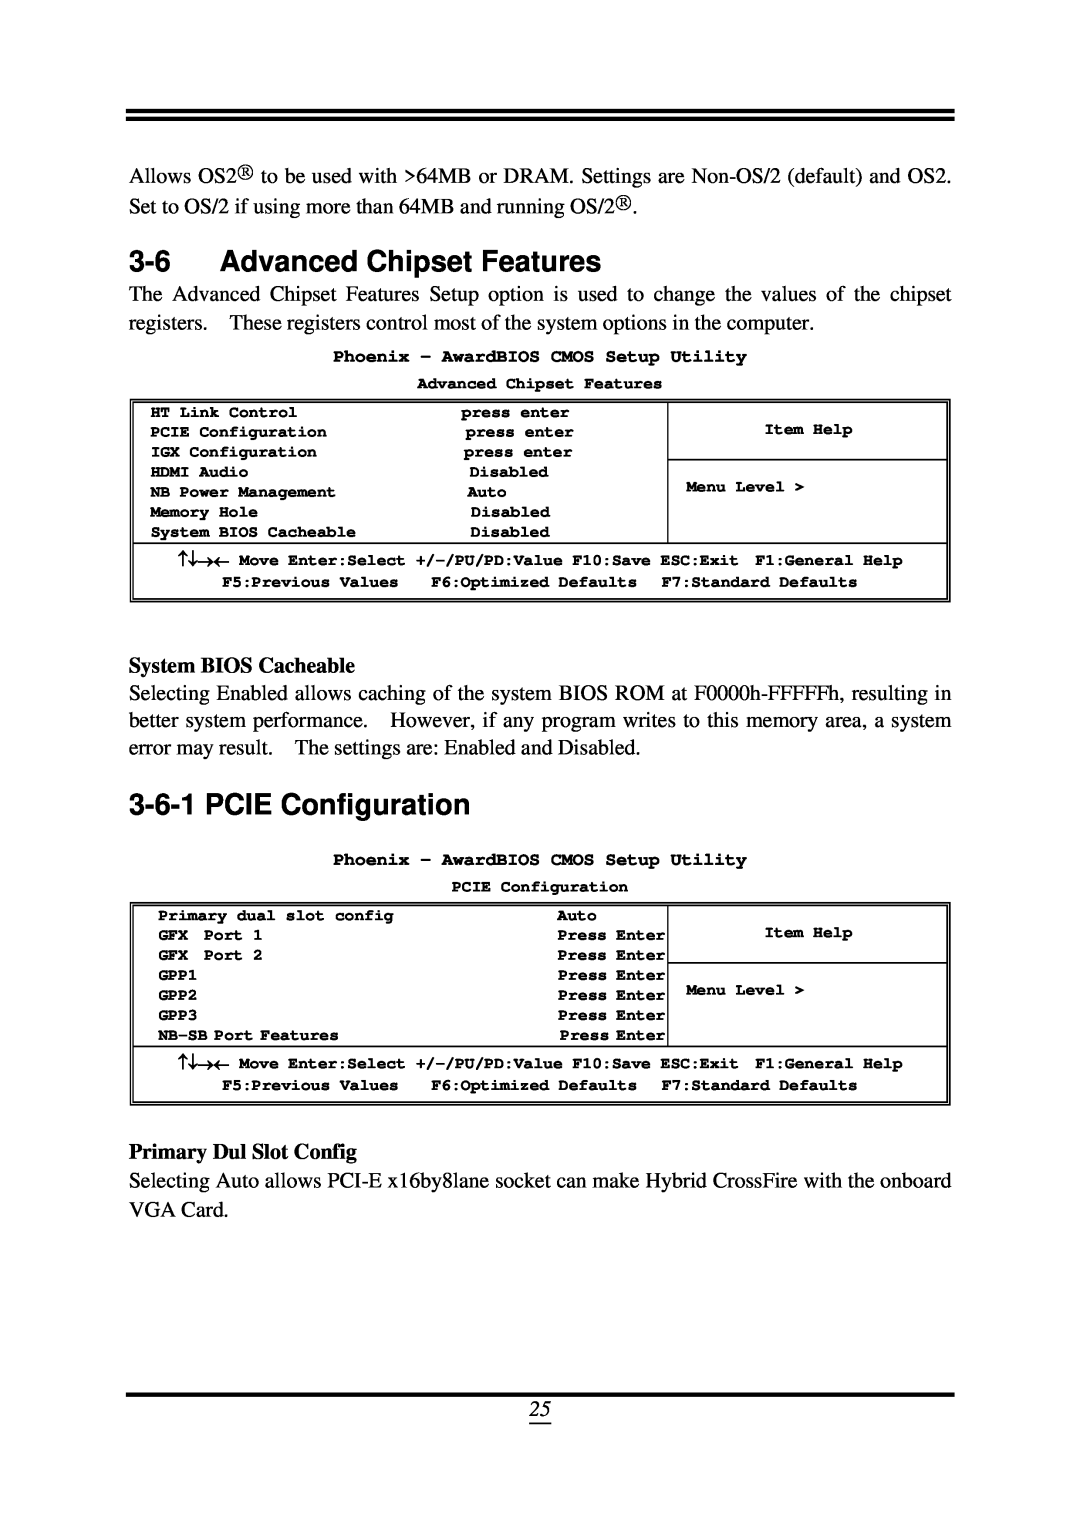 AMD 790GX, SB750 user manual Advanced Chipset Features, PCIE Configuration, System BIOS Cacheable, Primary Dul Slot Config 